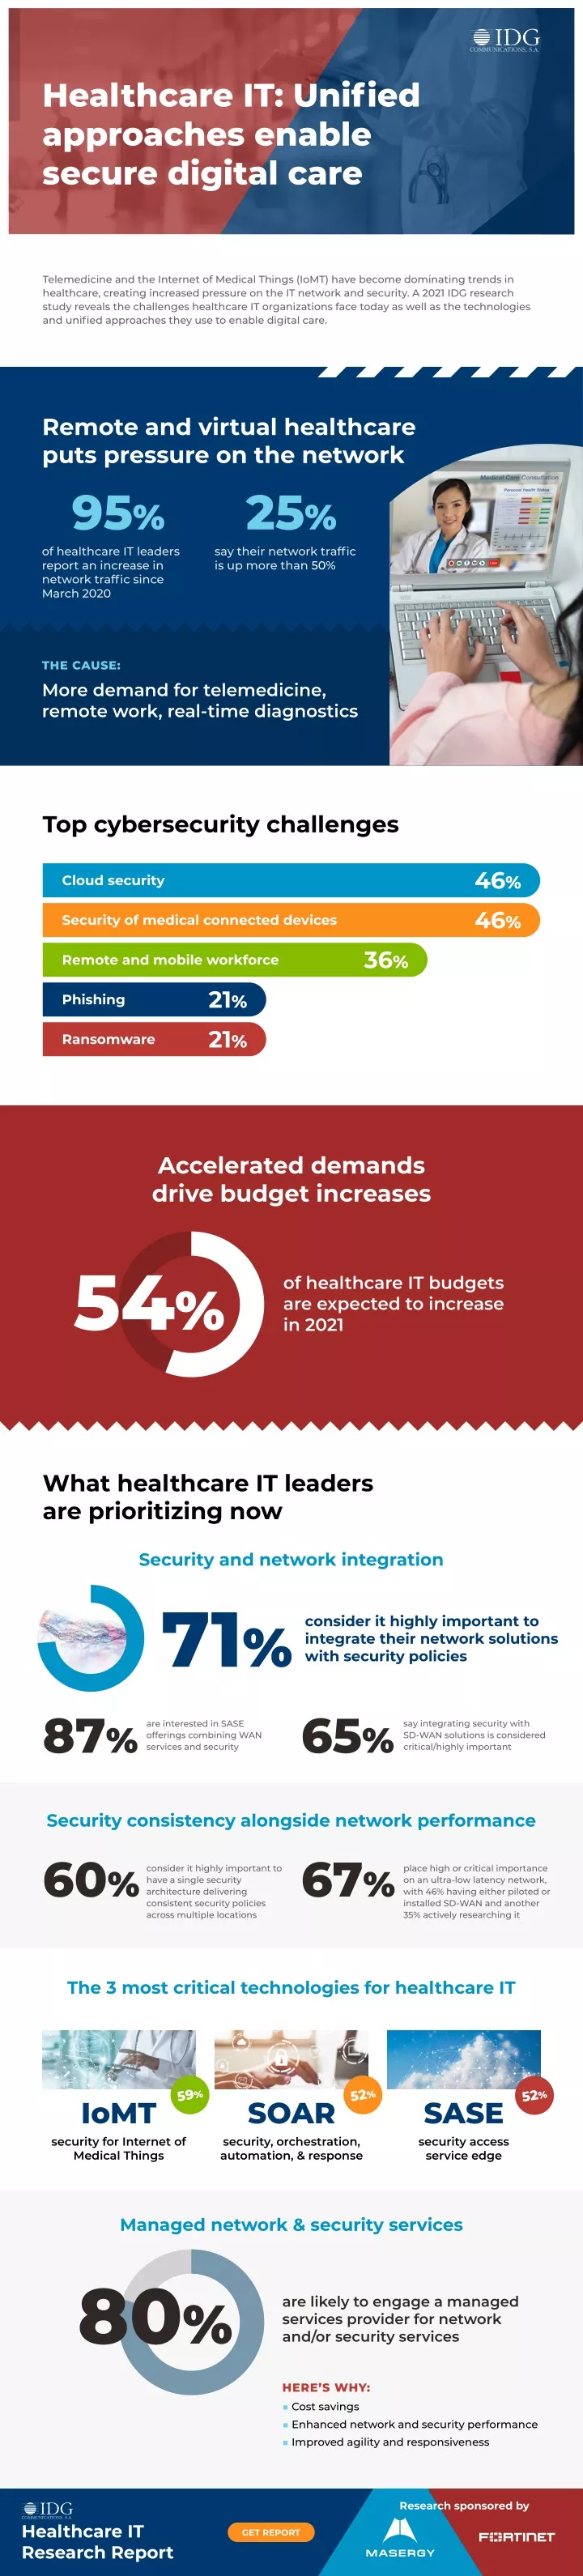 healthcare it unified approaches enable secure